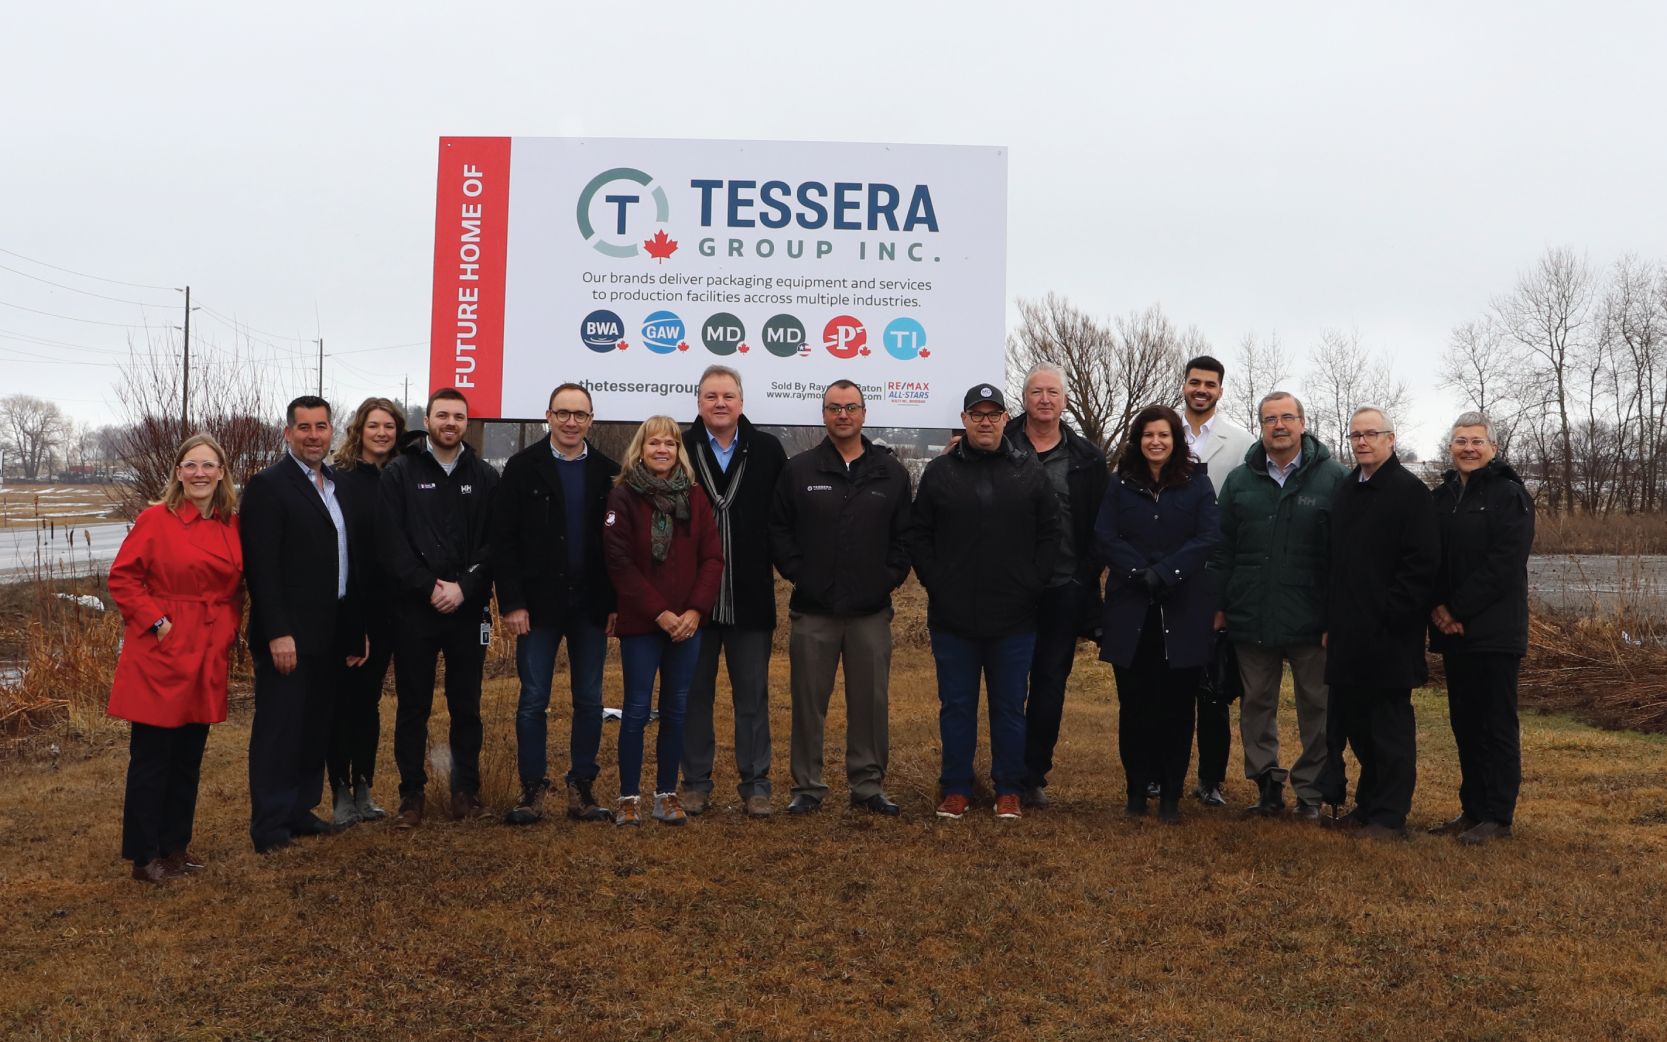 Group shot of Tessera Group and staff from Invest Durham and the Township of Scugog.